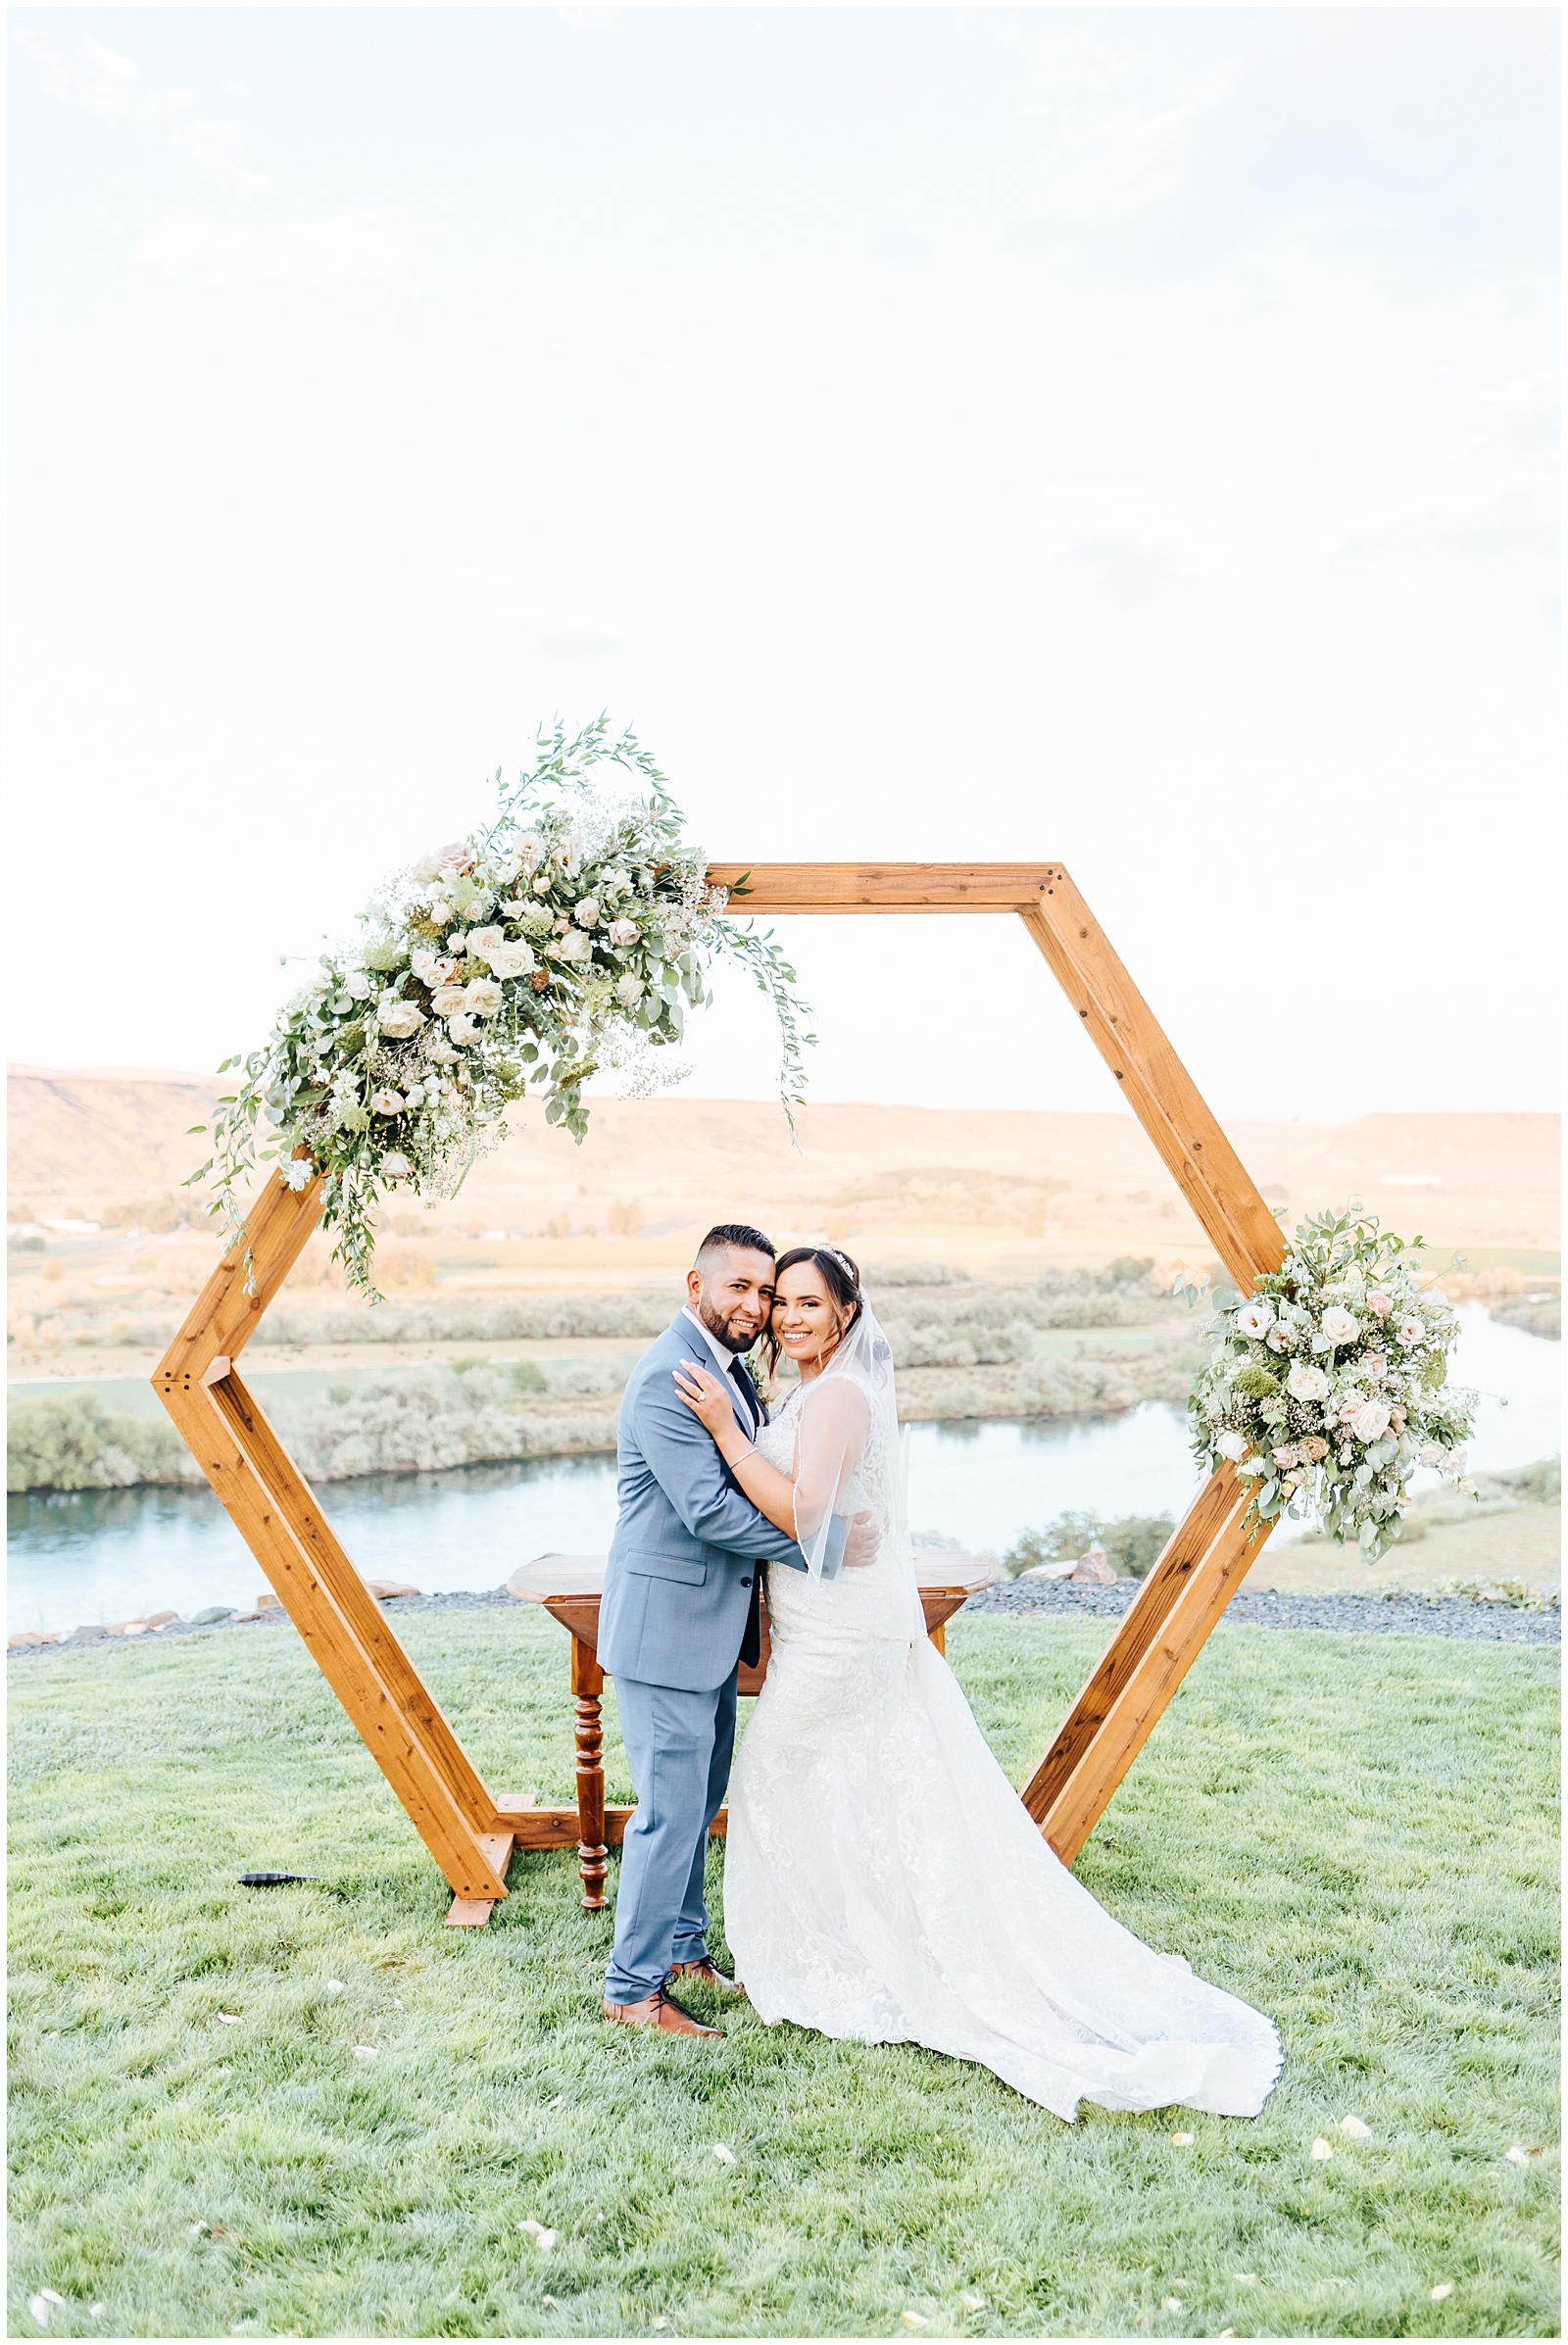 Ceremony Hexagon Wood Arch with Floral Pieces Overlooking the Canyon Portrait of the Bride and Groom